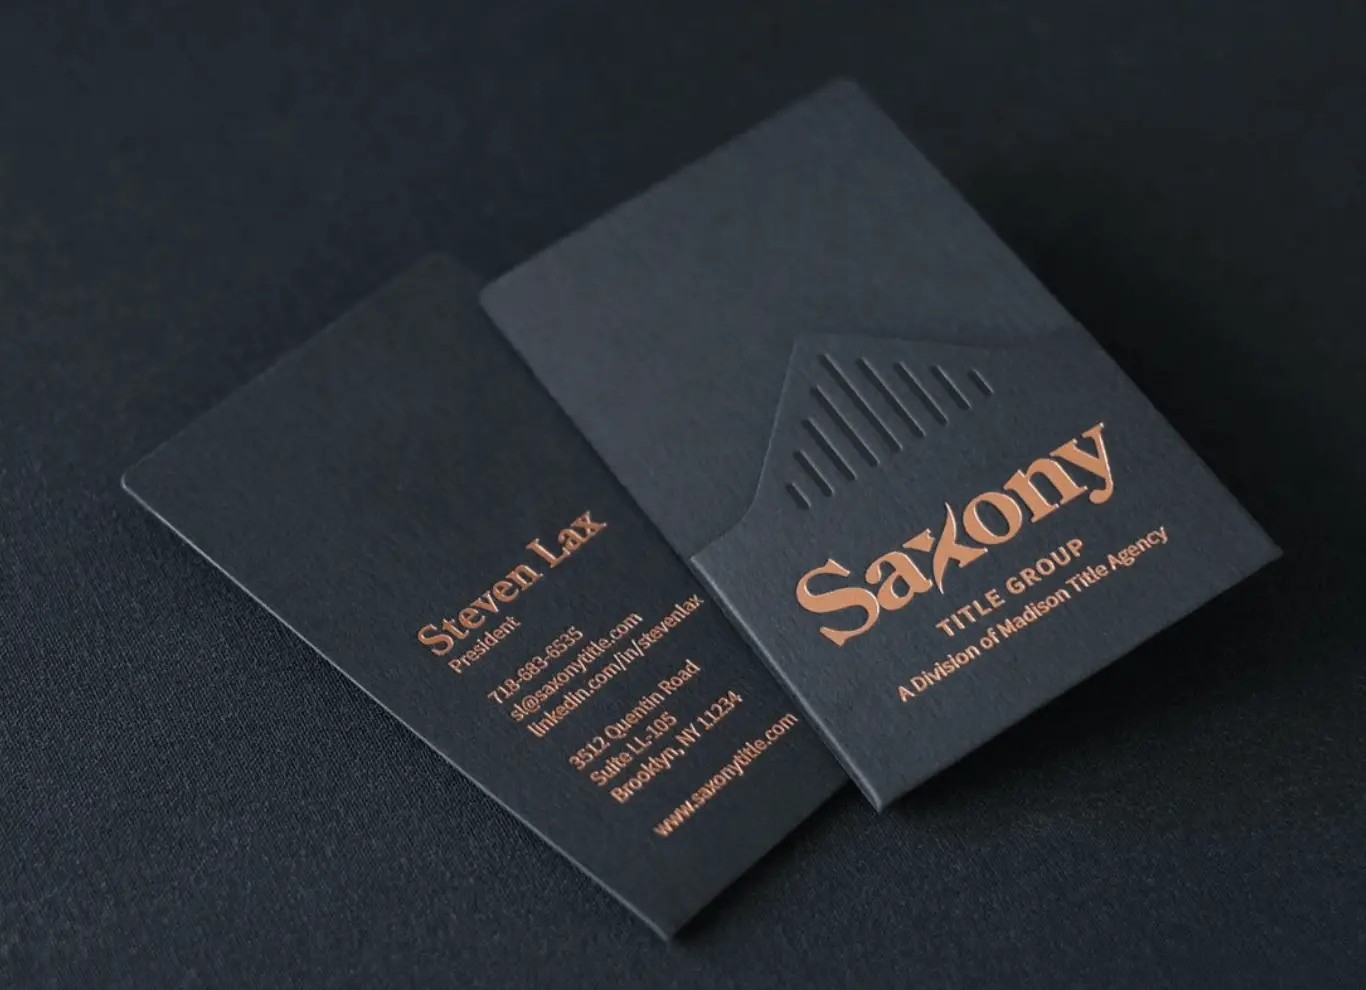 A business card with embossed lettering.